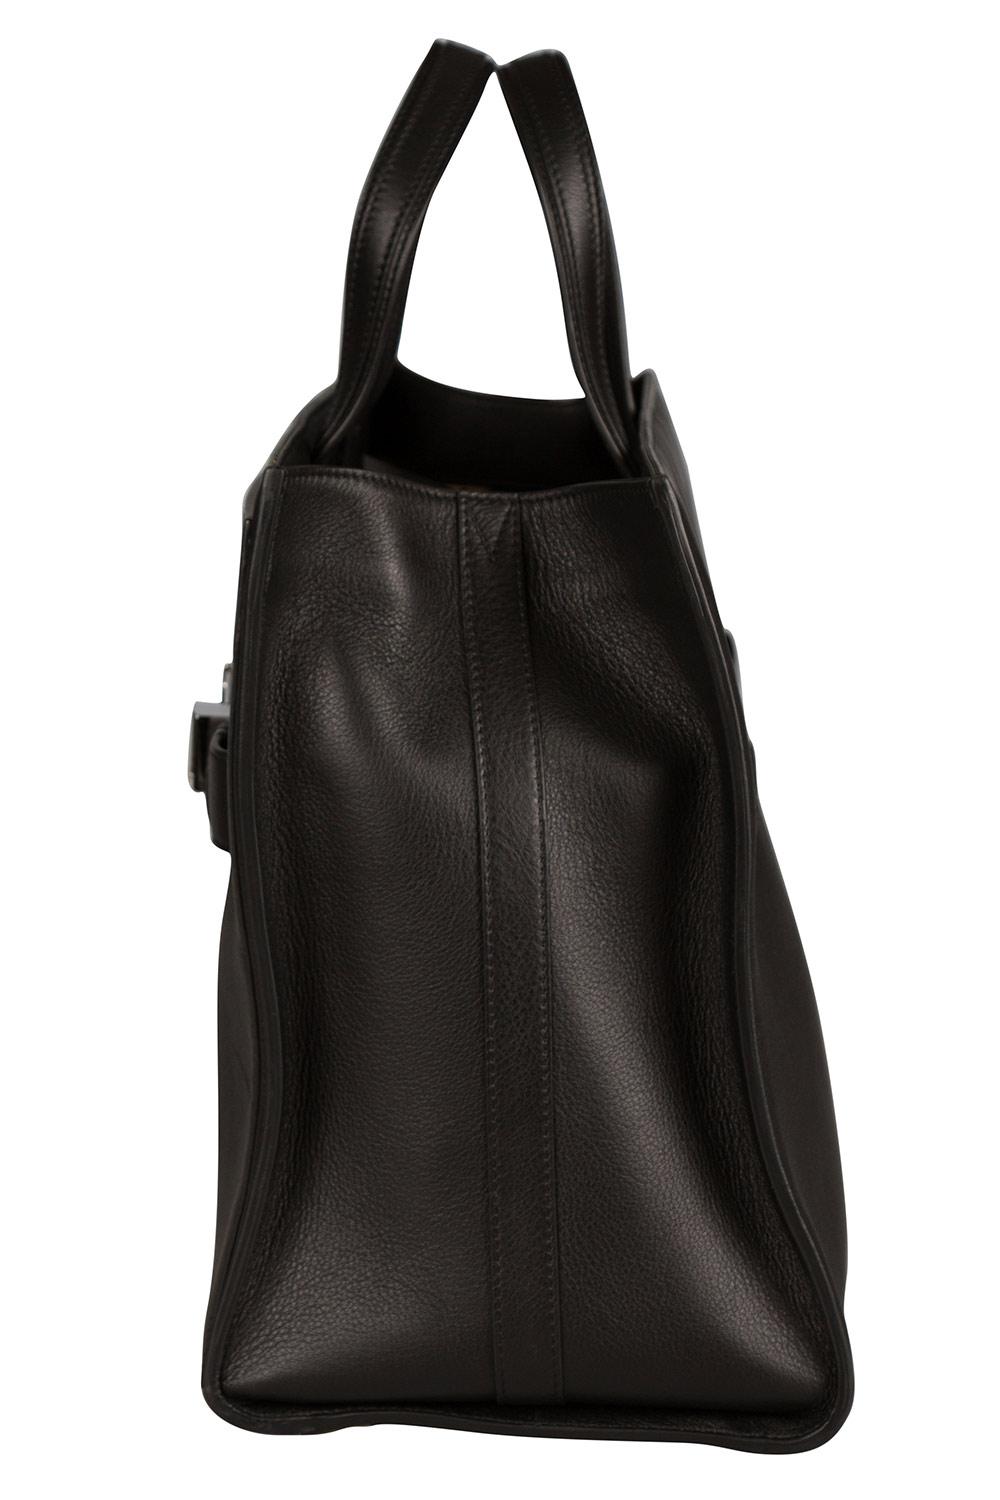 Proenza Schouler Black Leather Large PSII Wide Tote 1